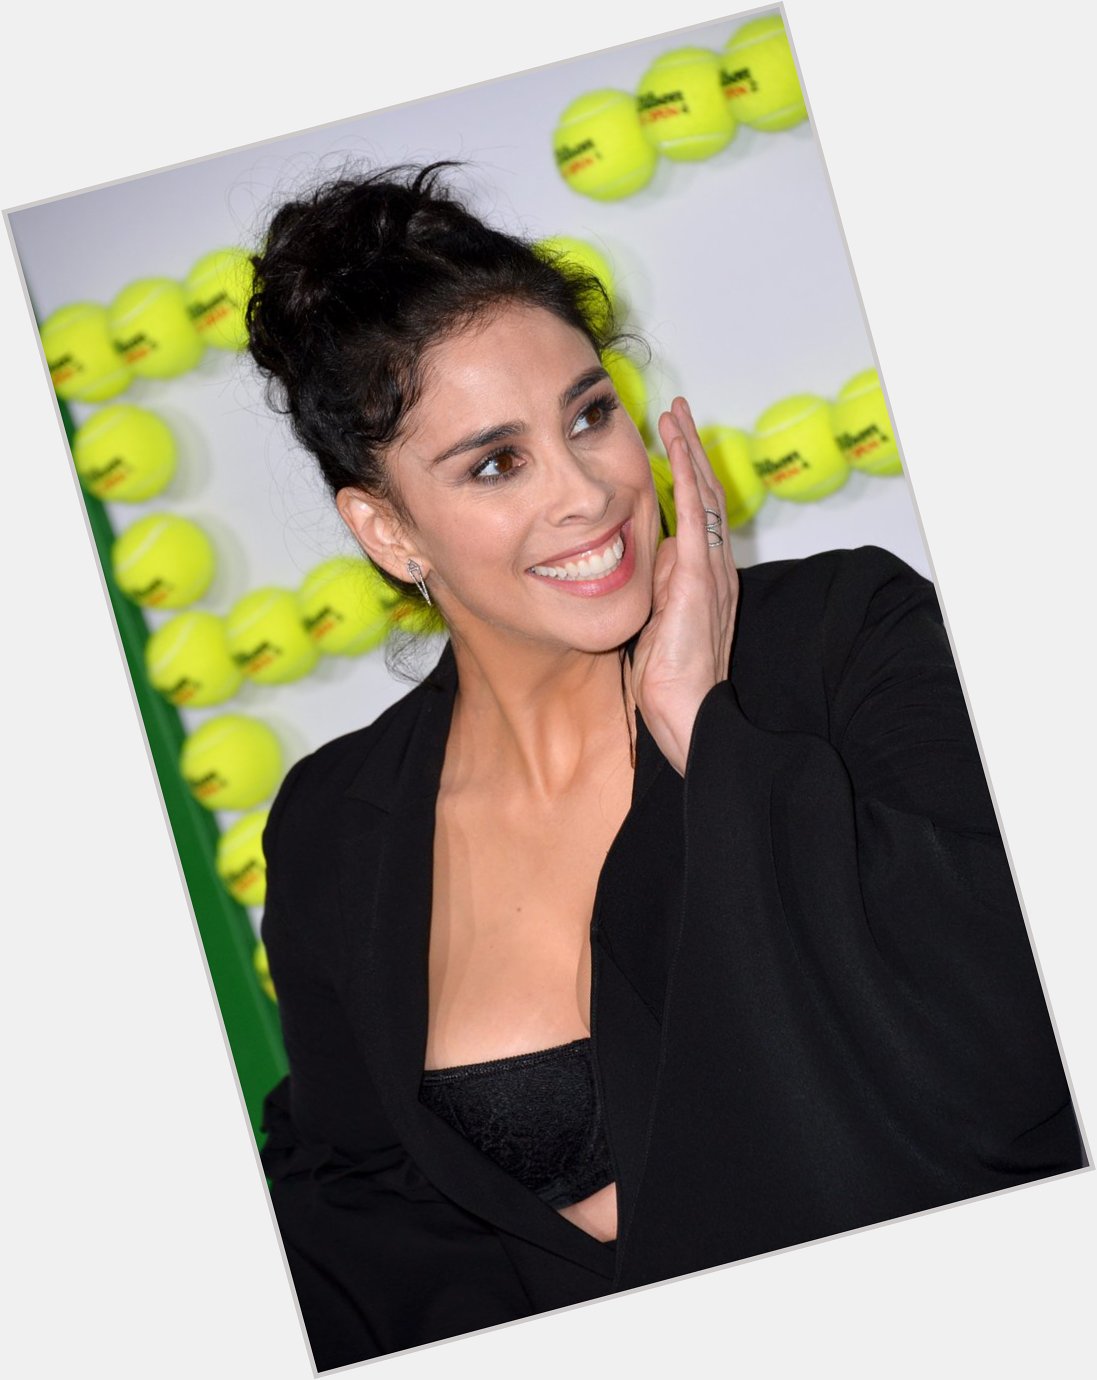 Happy Birthday to the funny, brilliant, and multi-talented beauty: Sarah Silverman! 